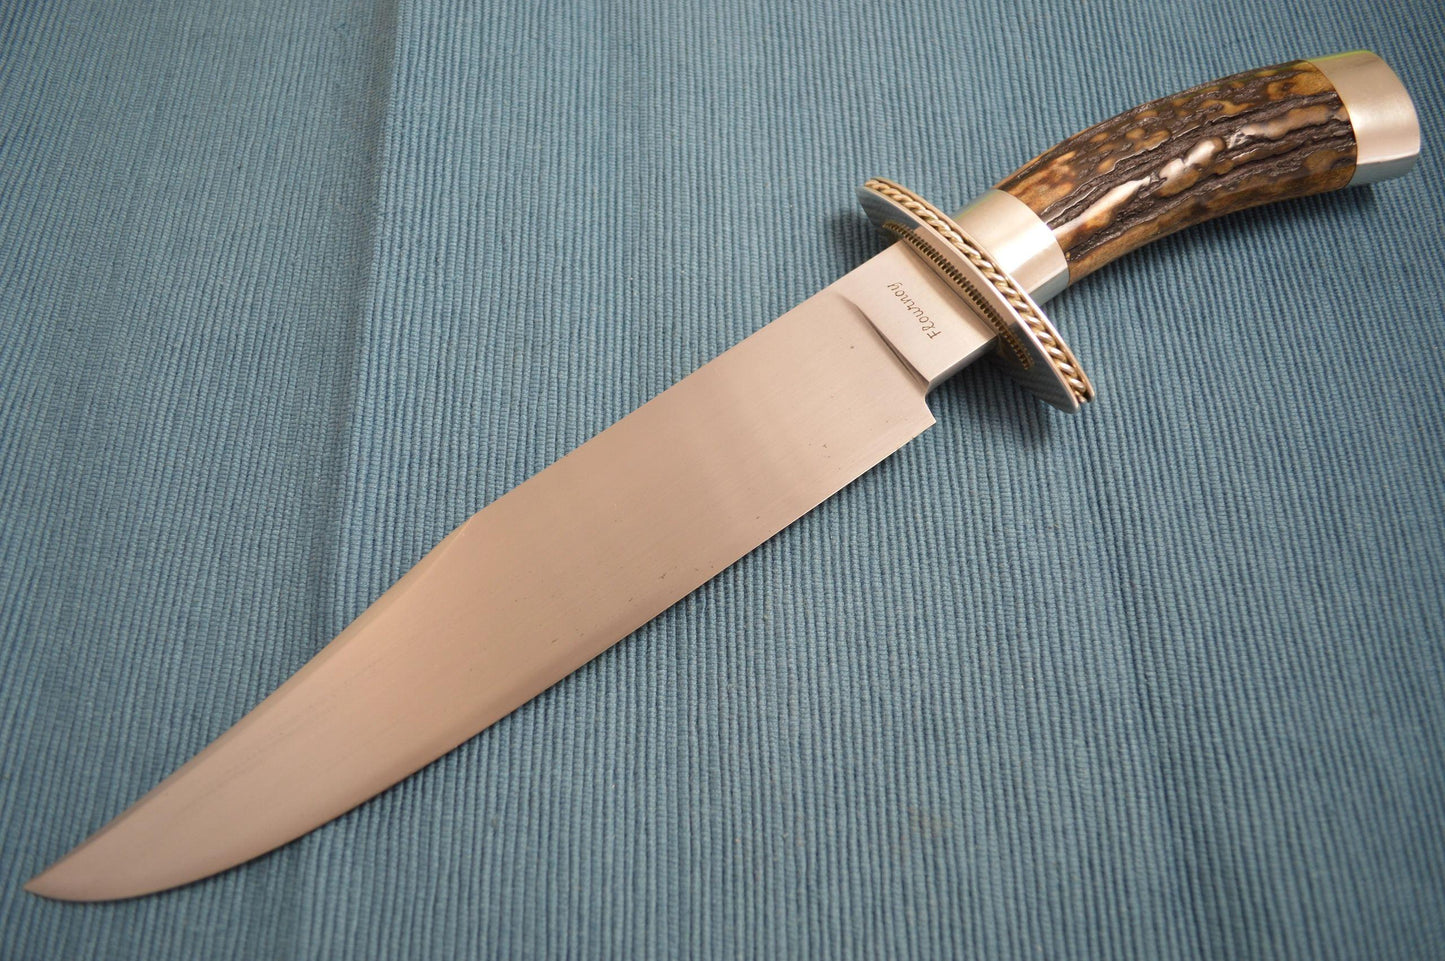 Joe Flournoy M.S. Stag Handle Bowie, Sterling Silver Fittings